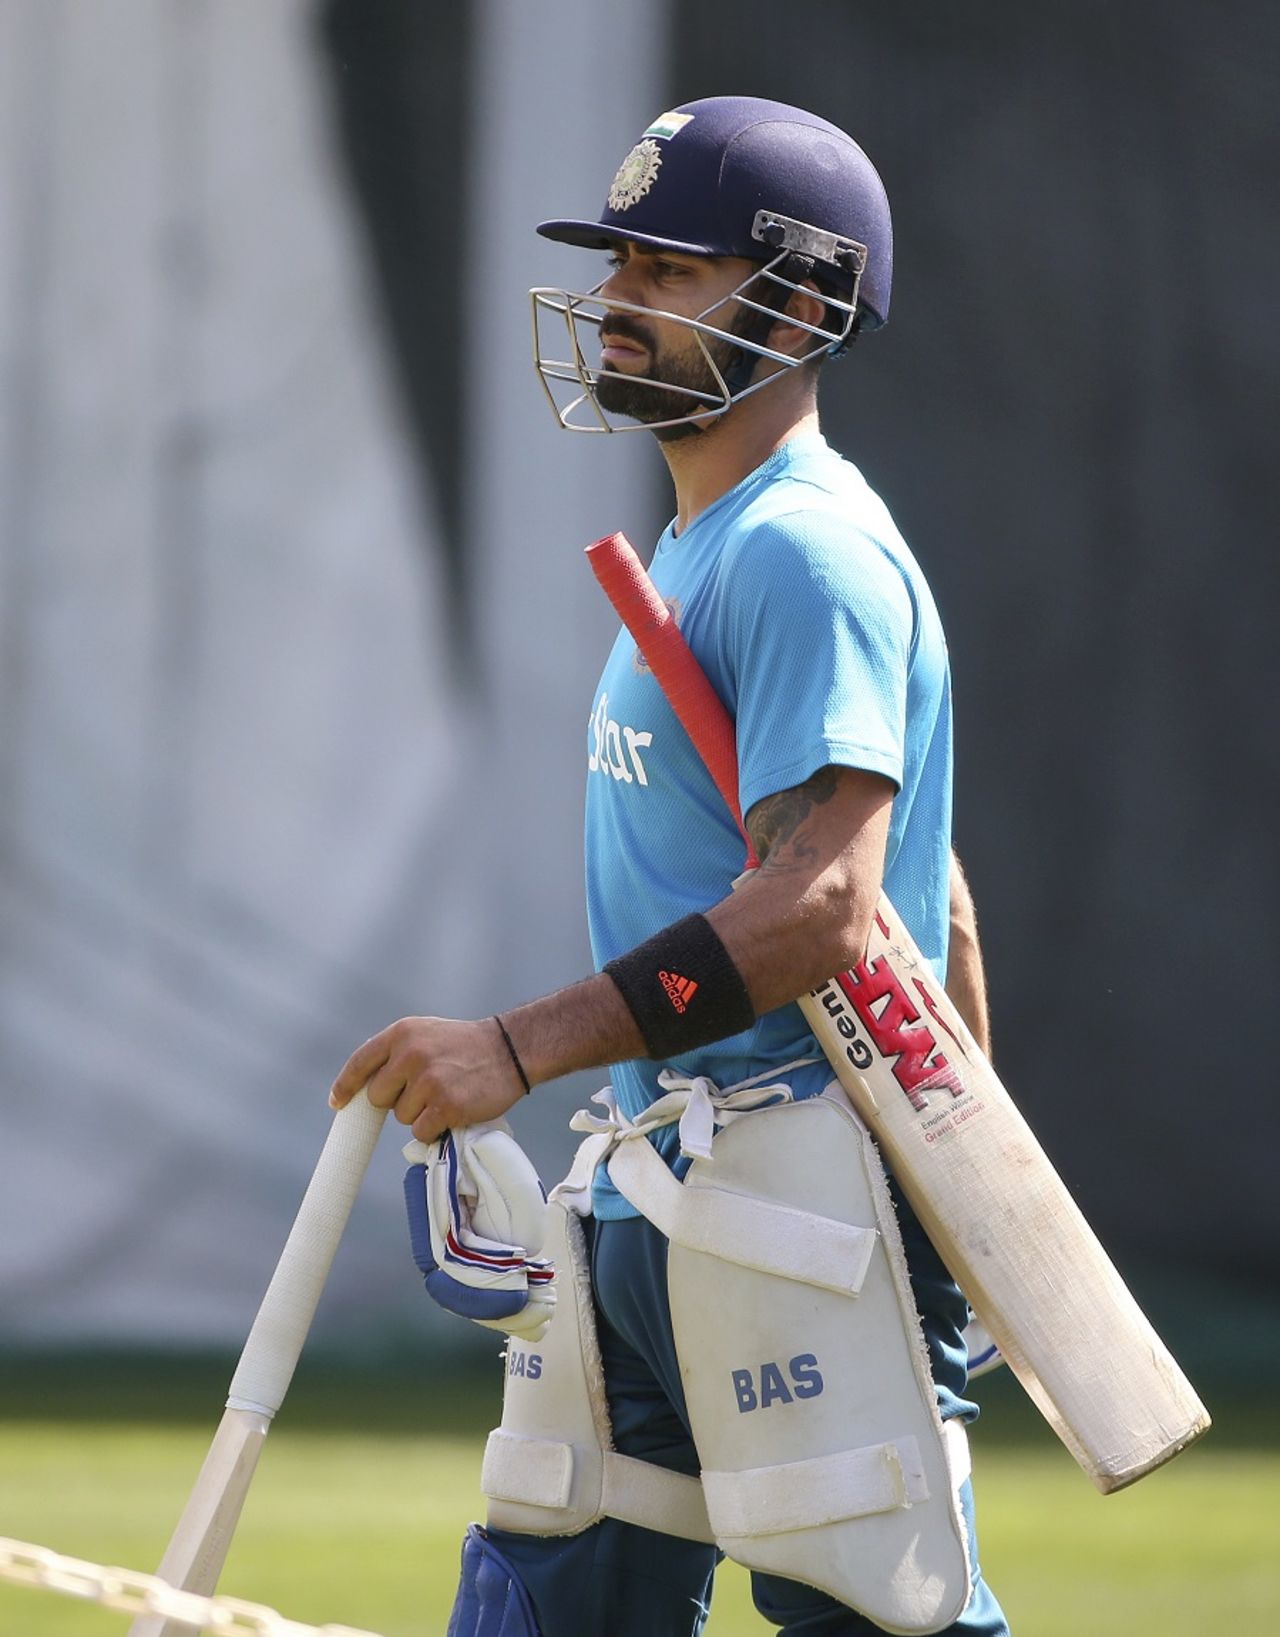 Virat Kohli prepares for a hit in the nets, World Cup 2015, March 22, 2015